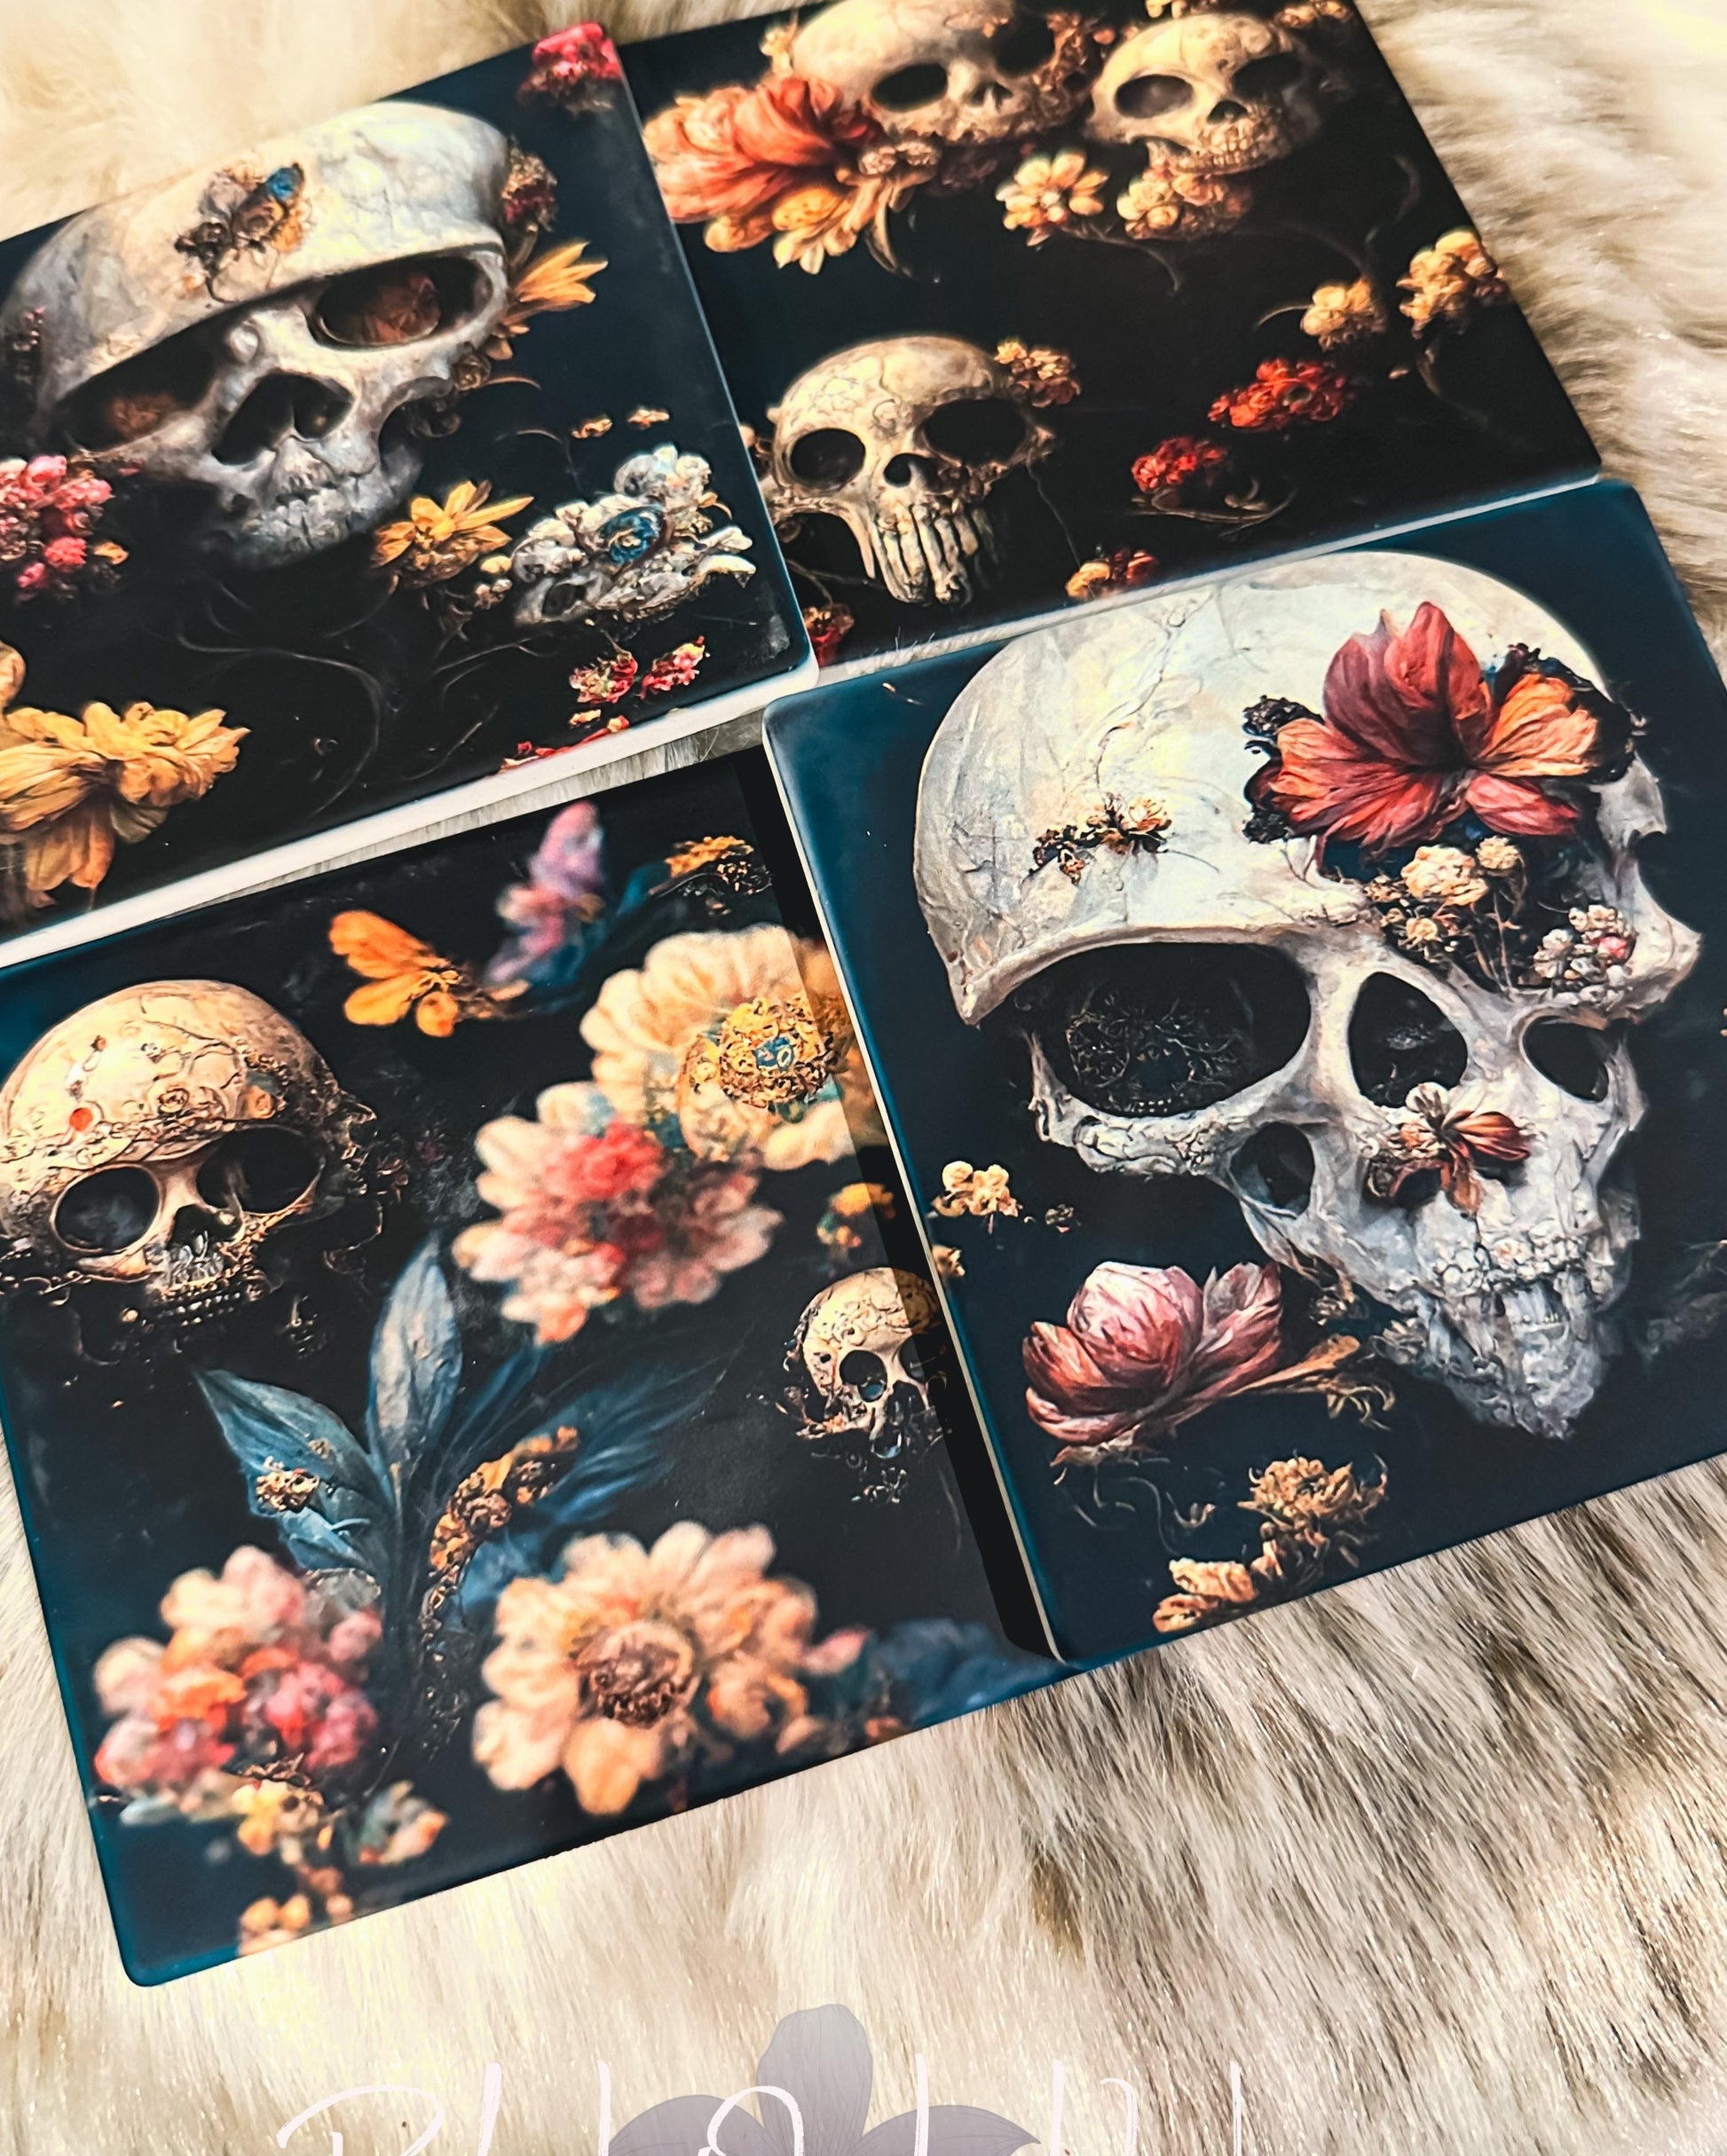 Dark Academia Skull Set of 4 Sandstone Coasters, Floral Skull Goth Coasters, Furniture and decor, goth home decor, gift for her